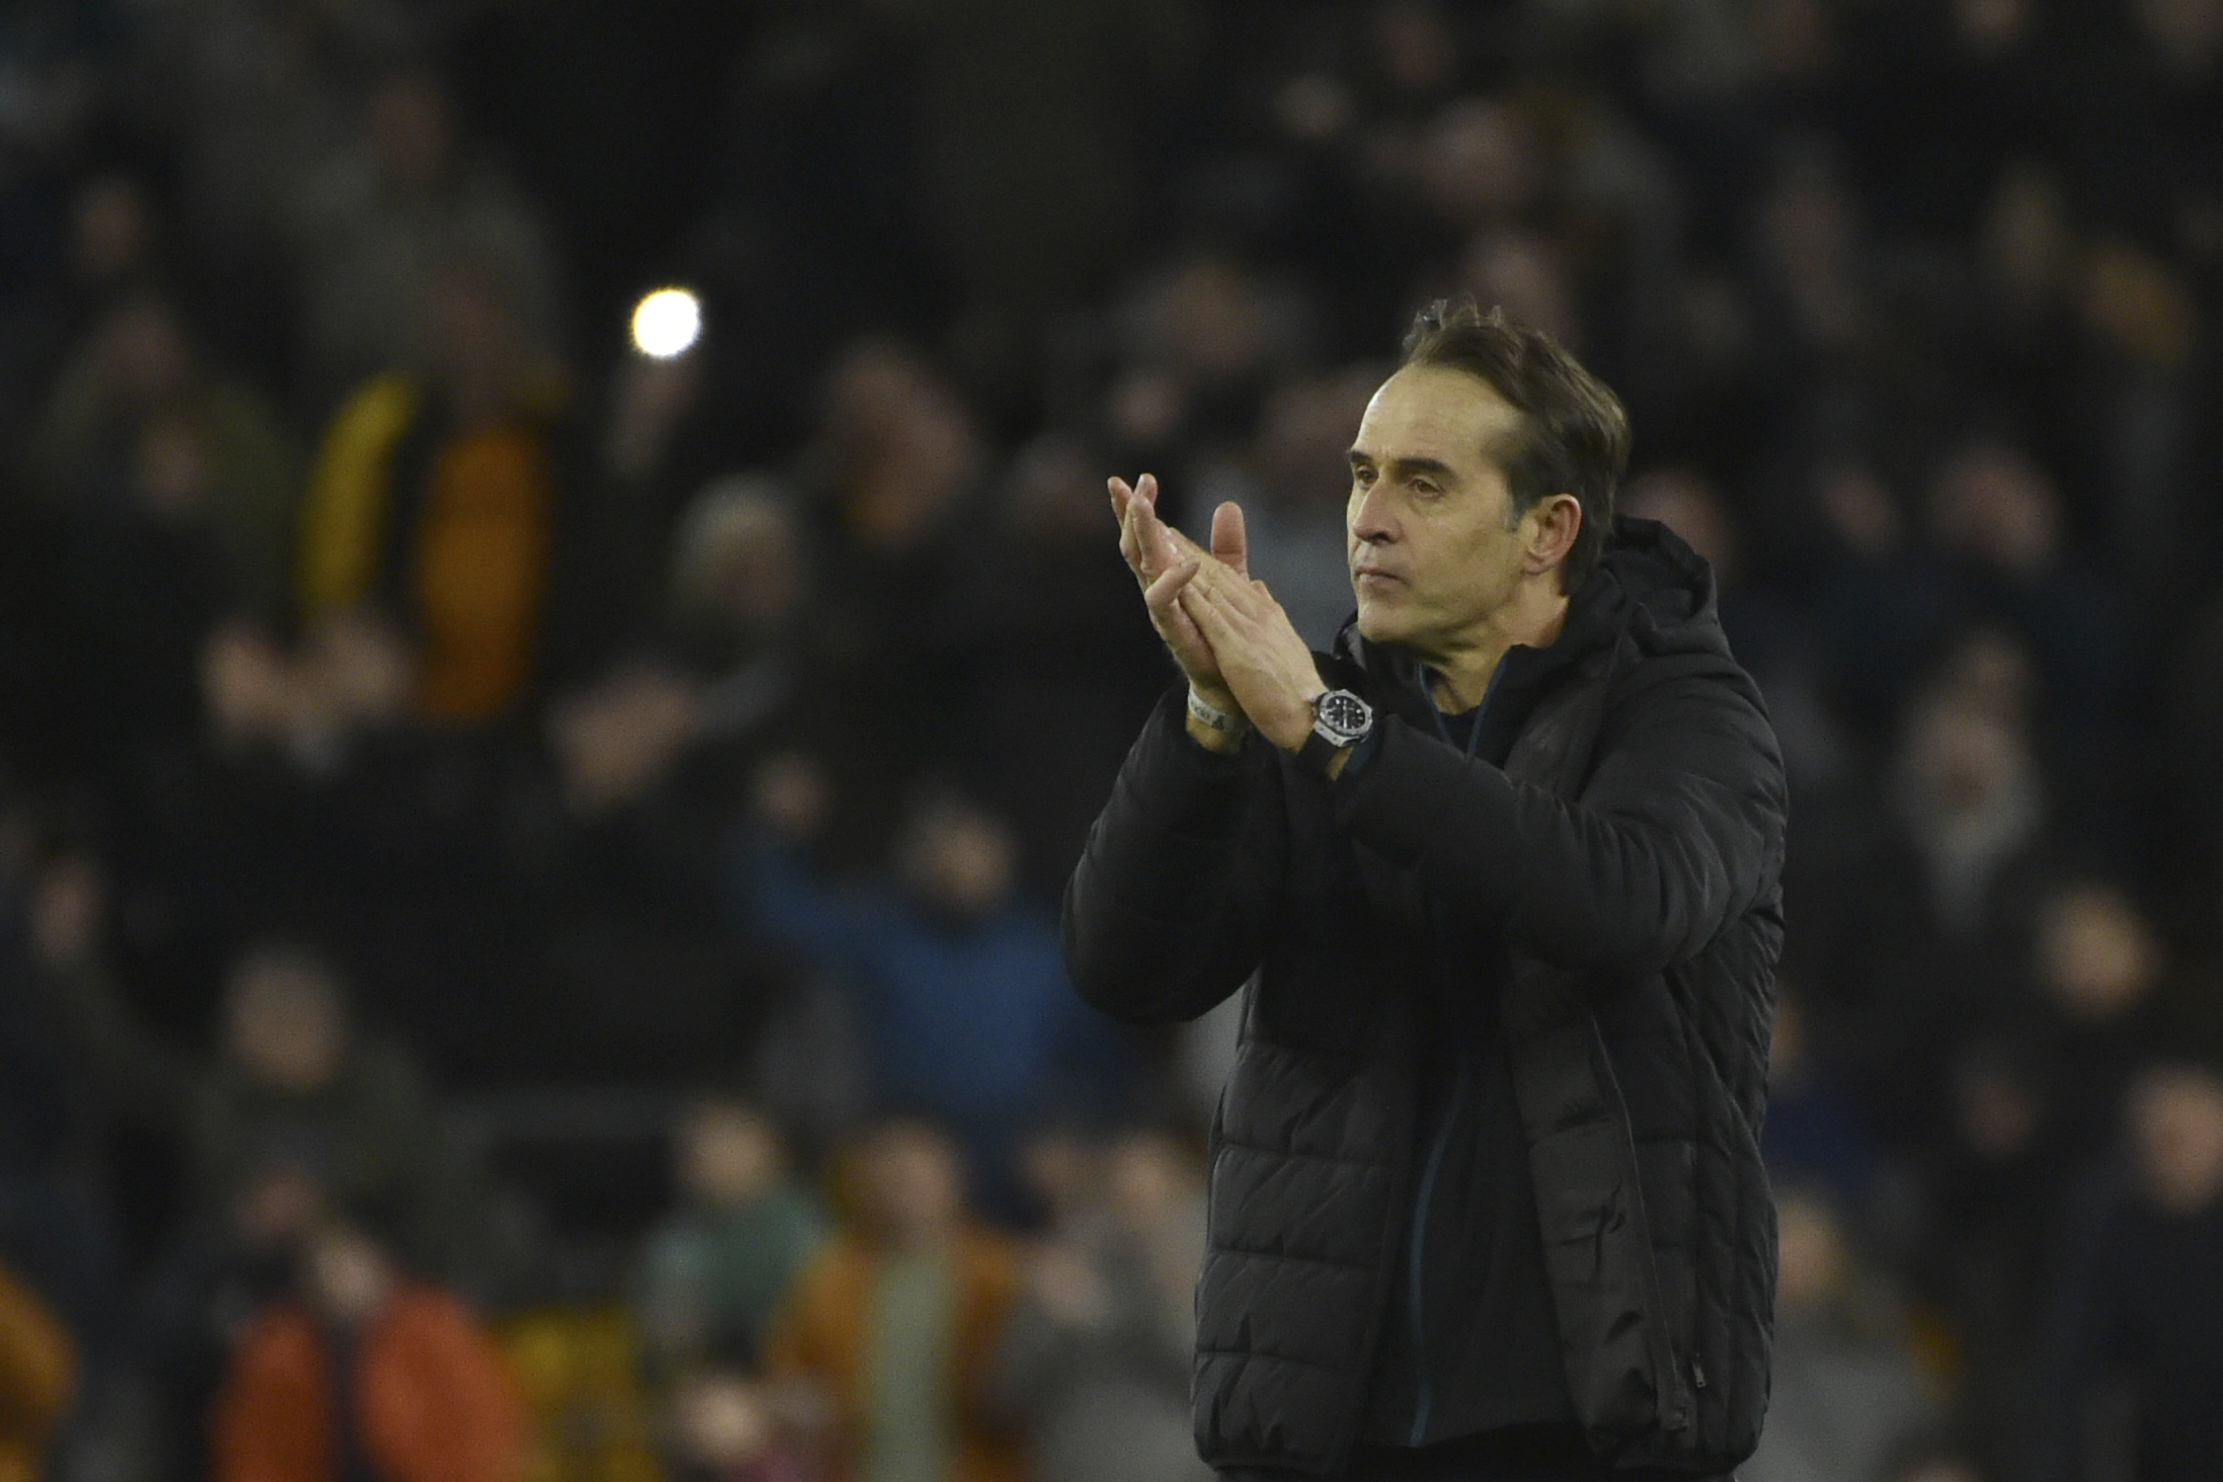 julen-lopetegui-would-be-one-of-the-options-to-replace-thomas-tuchel-at-bayern-munich